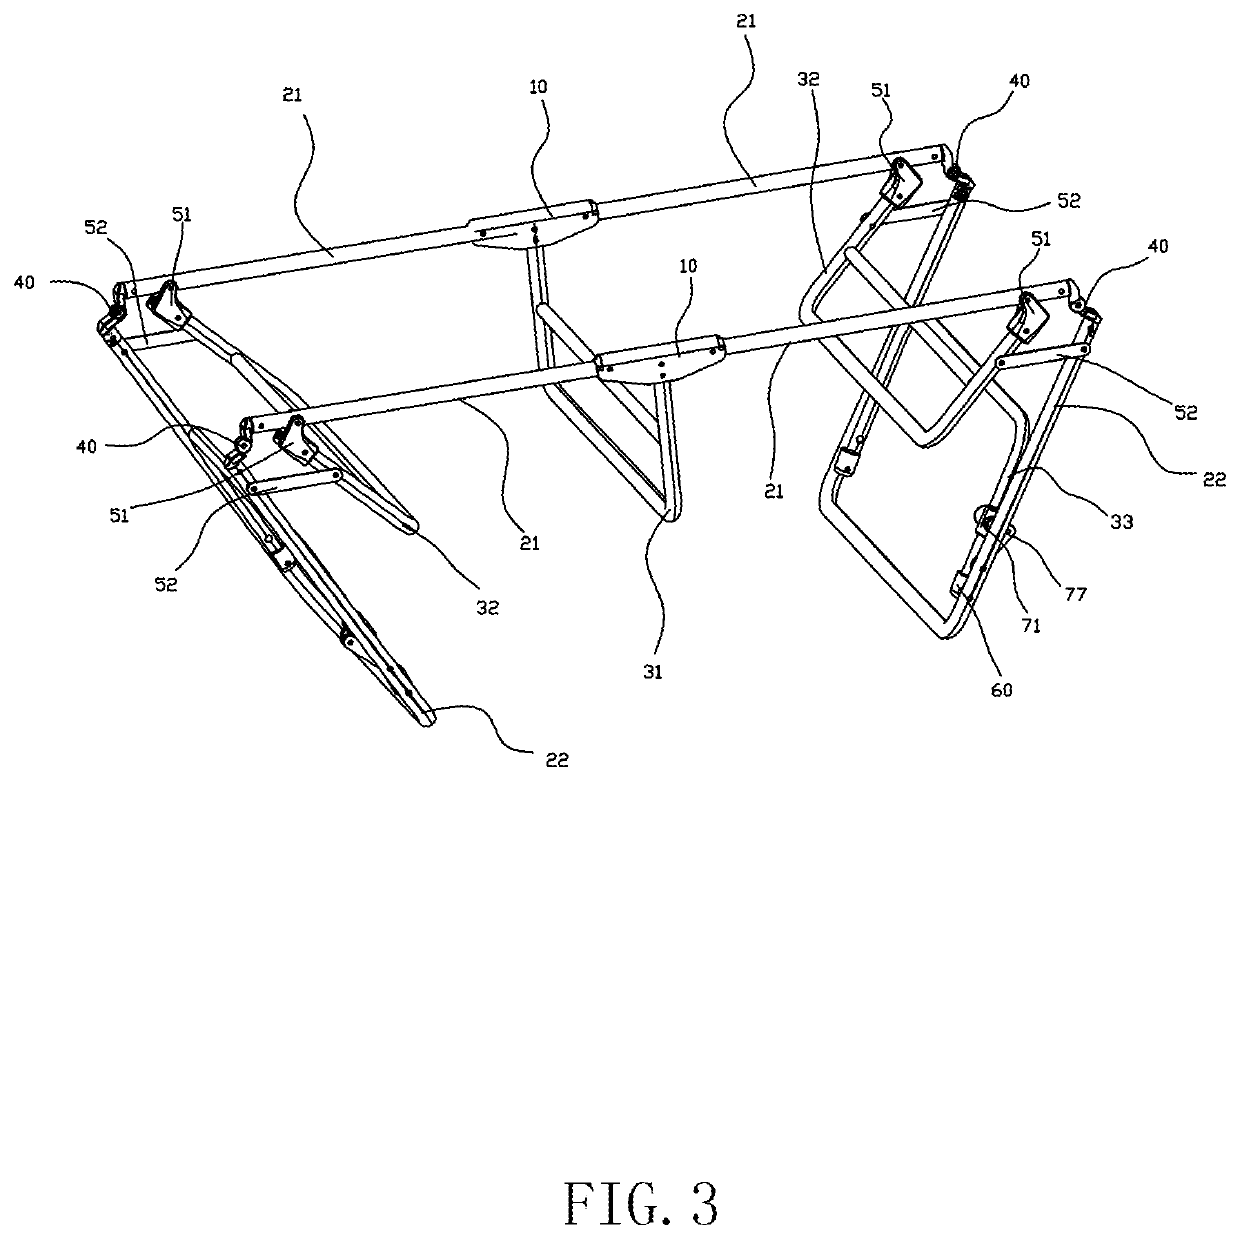 Folding bedstead and folding bed